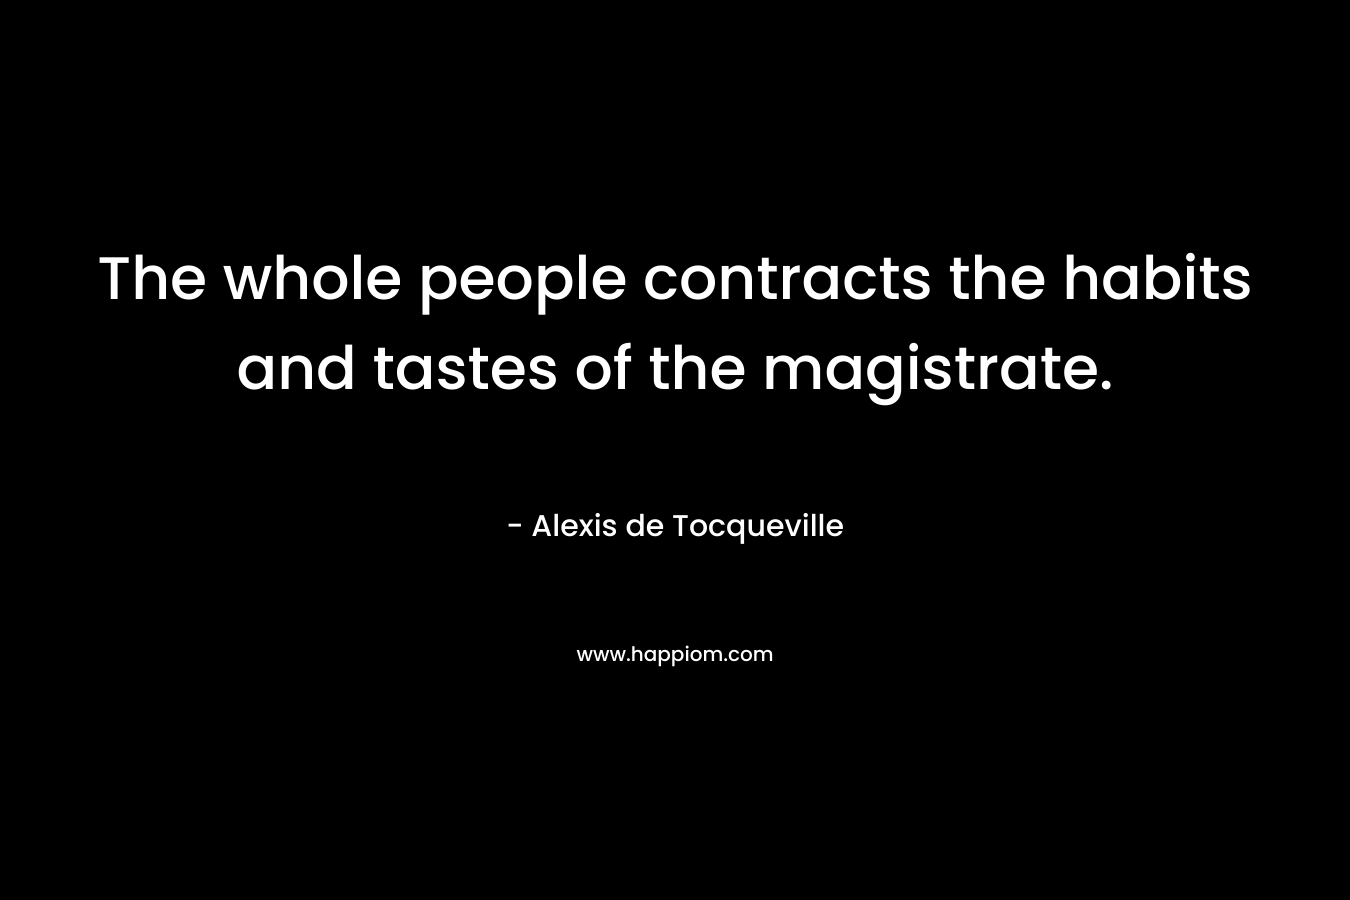 The whole people contracts the habits and tastes of the magistrate.